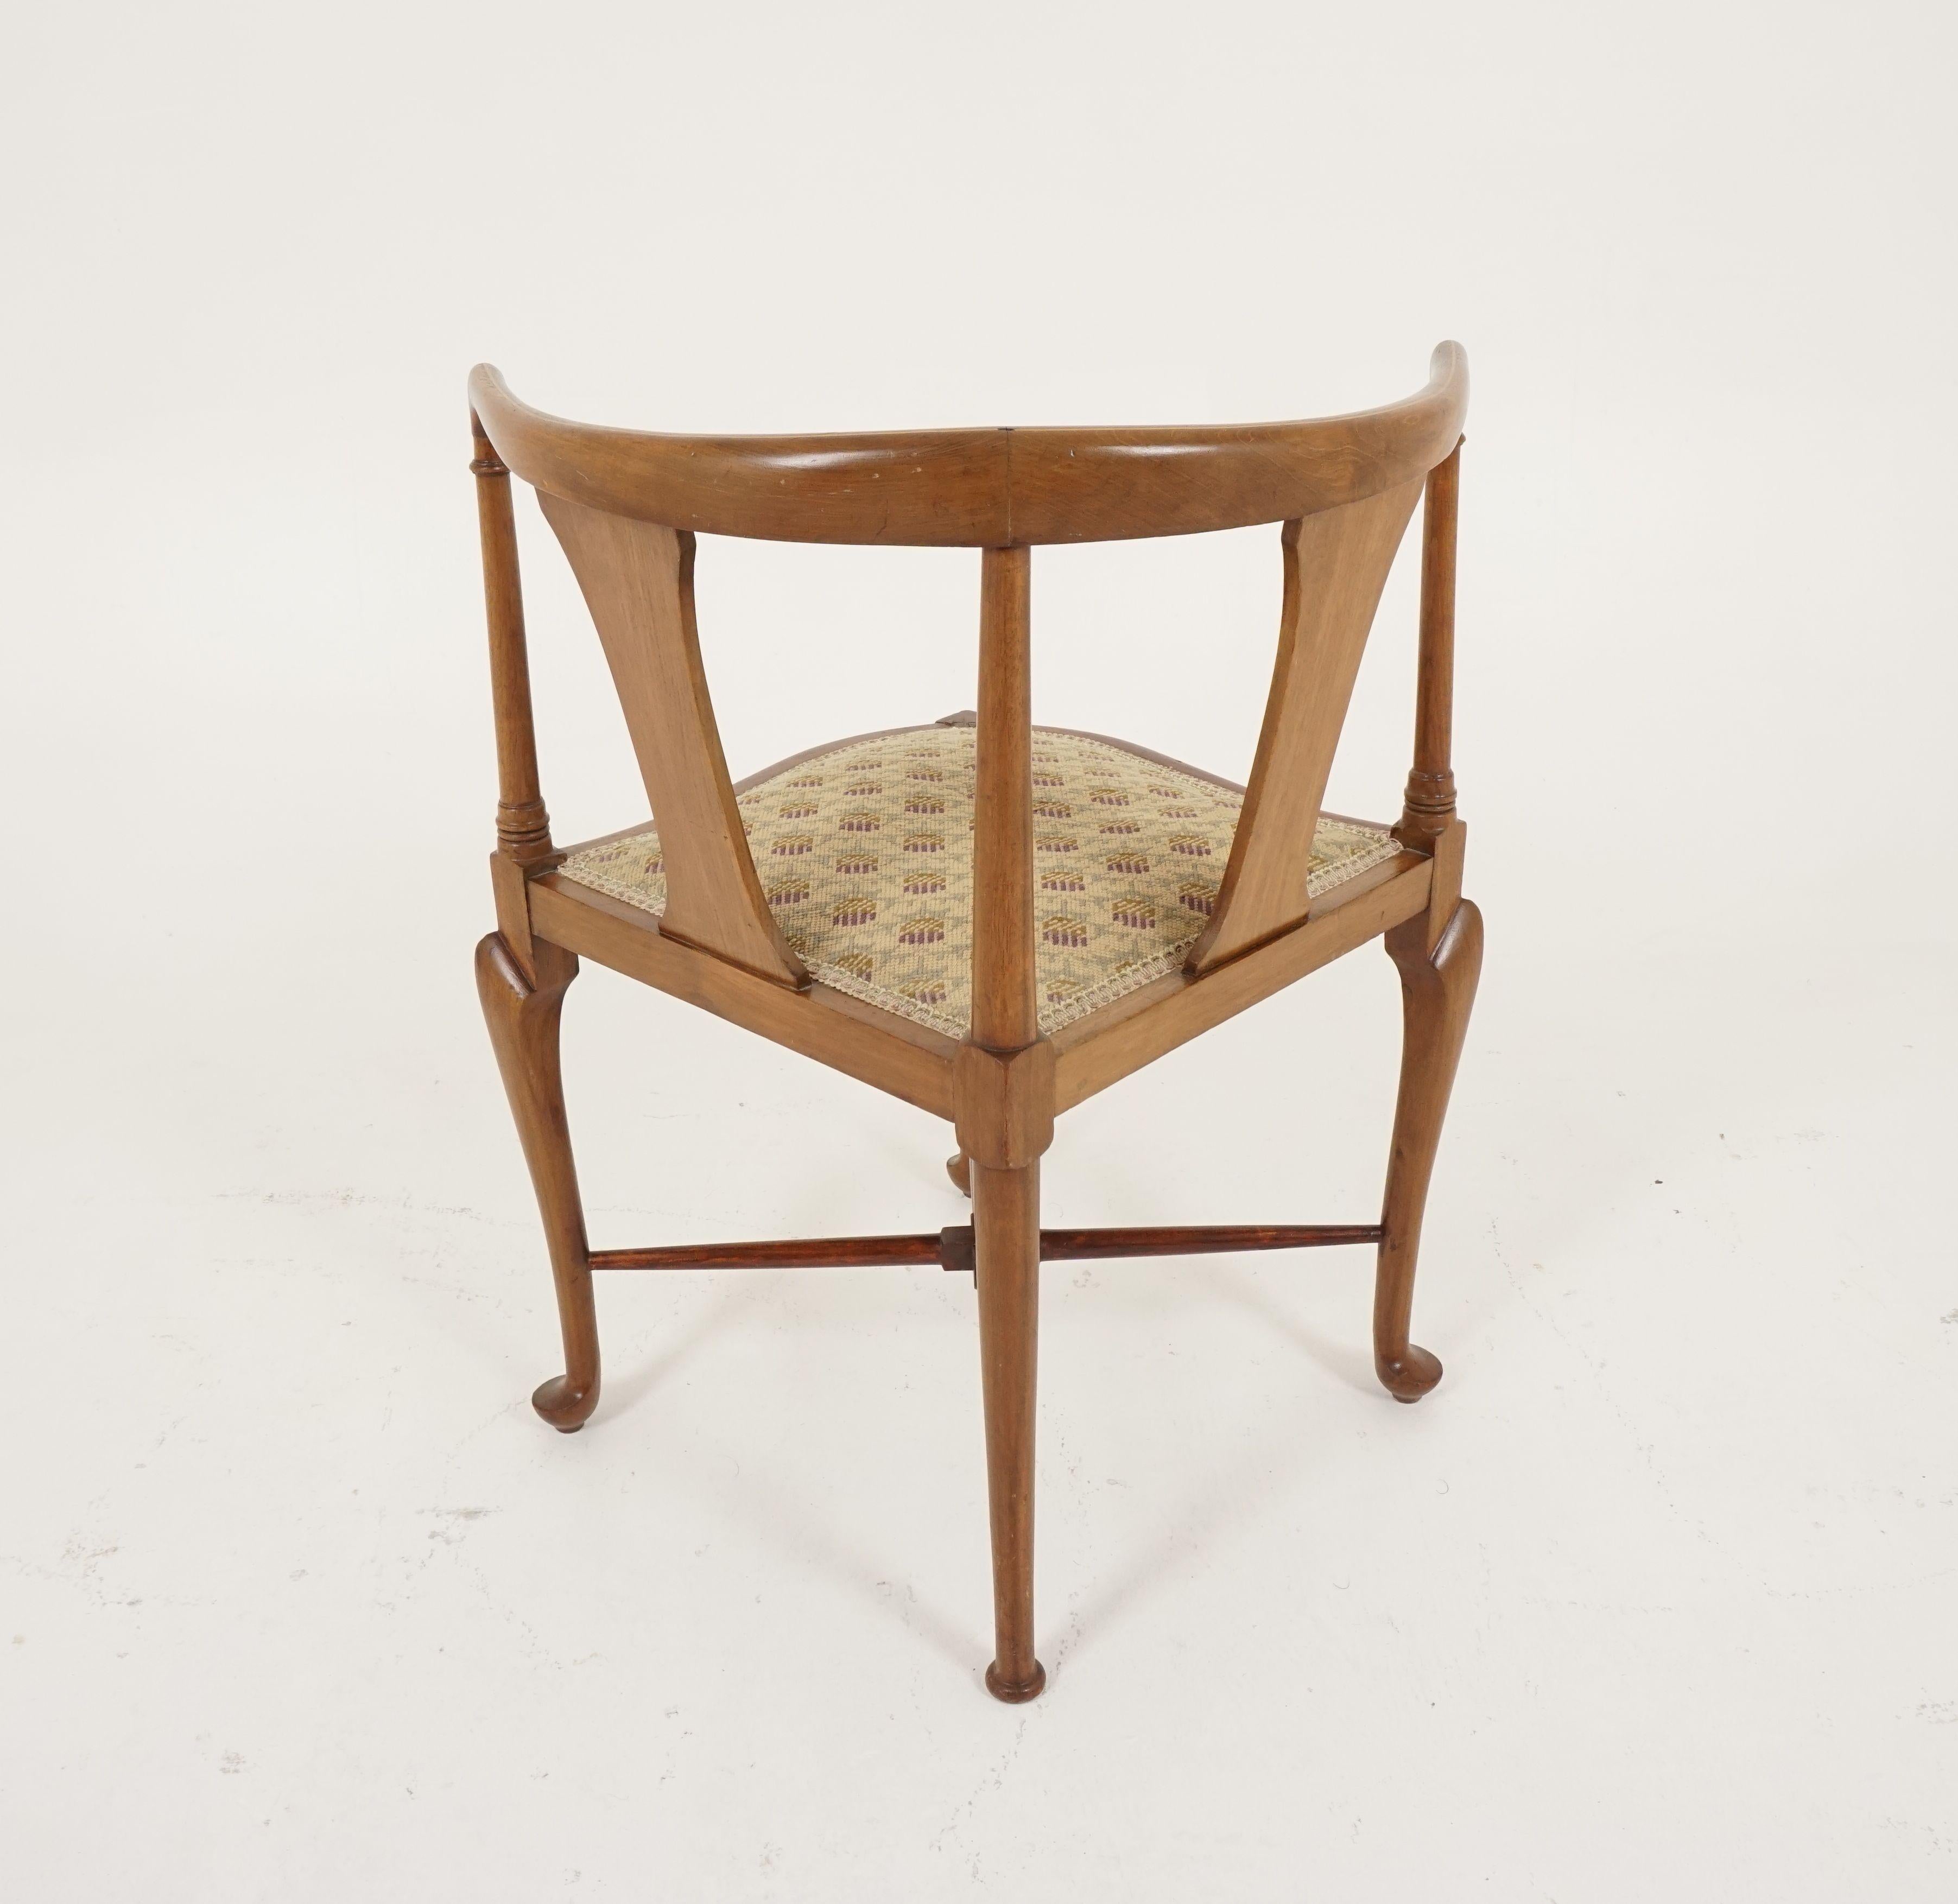 Early 20th Century Antique Inlaid Walnut Upholstered Corner Chair, Scotland 1910, H152